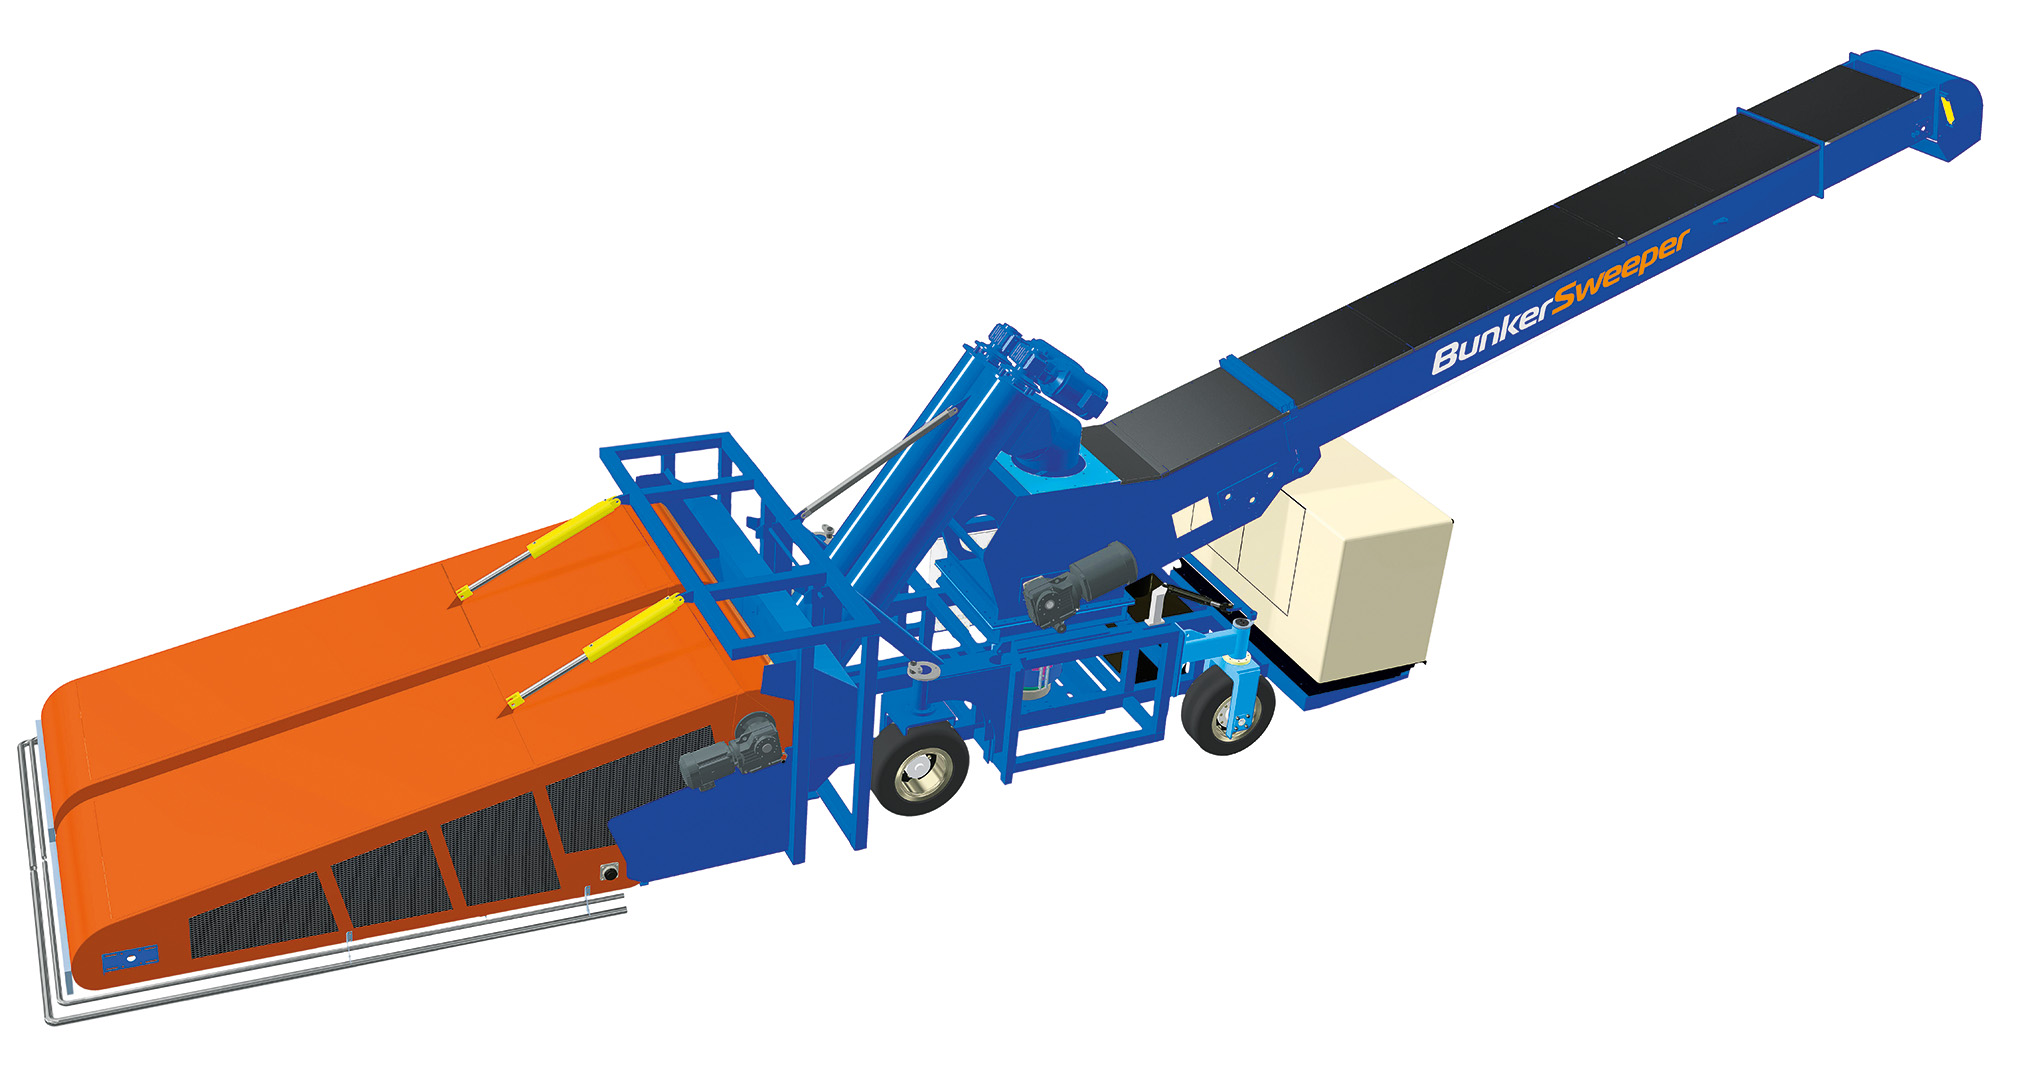 2023 model with feed augers